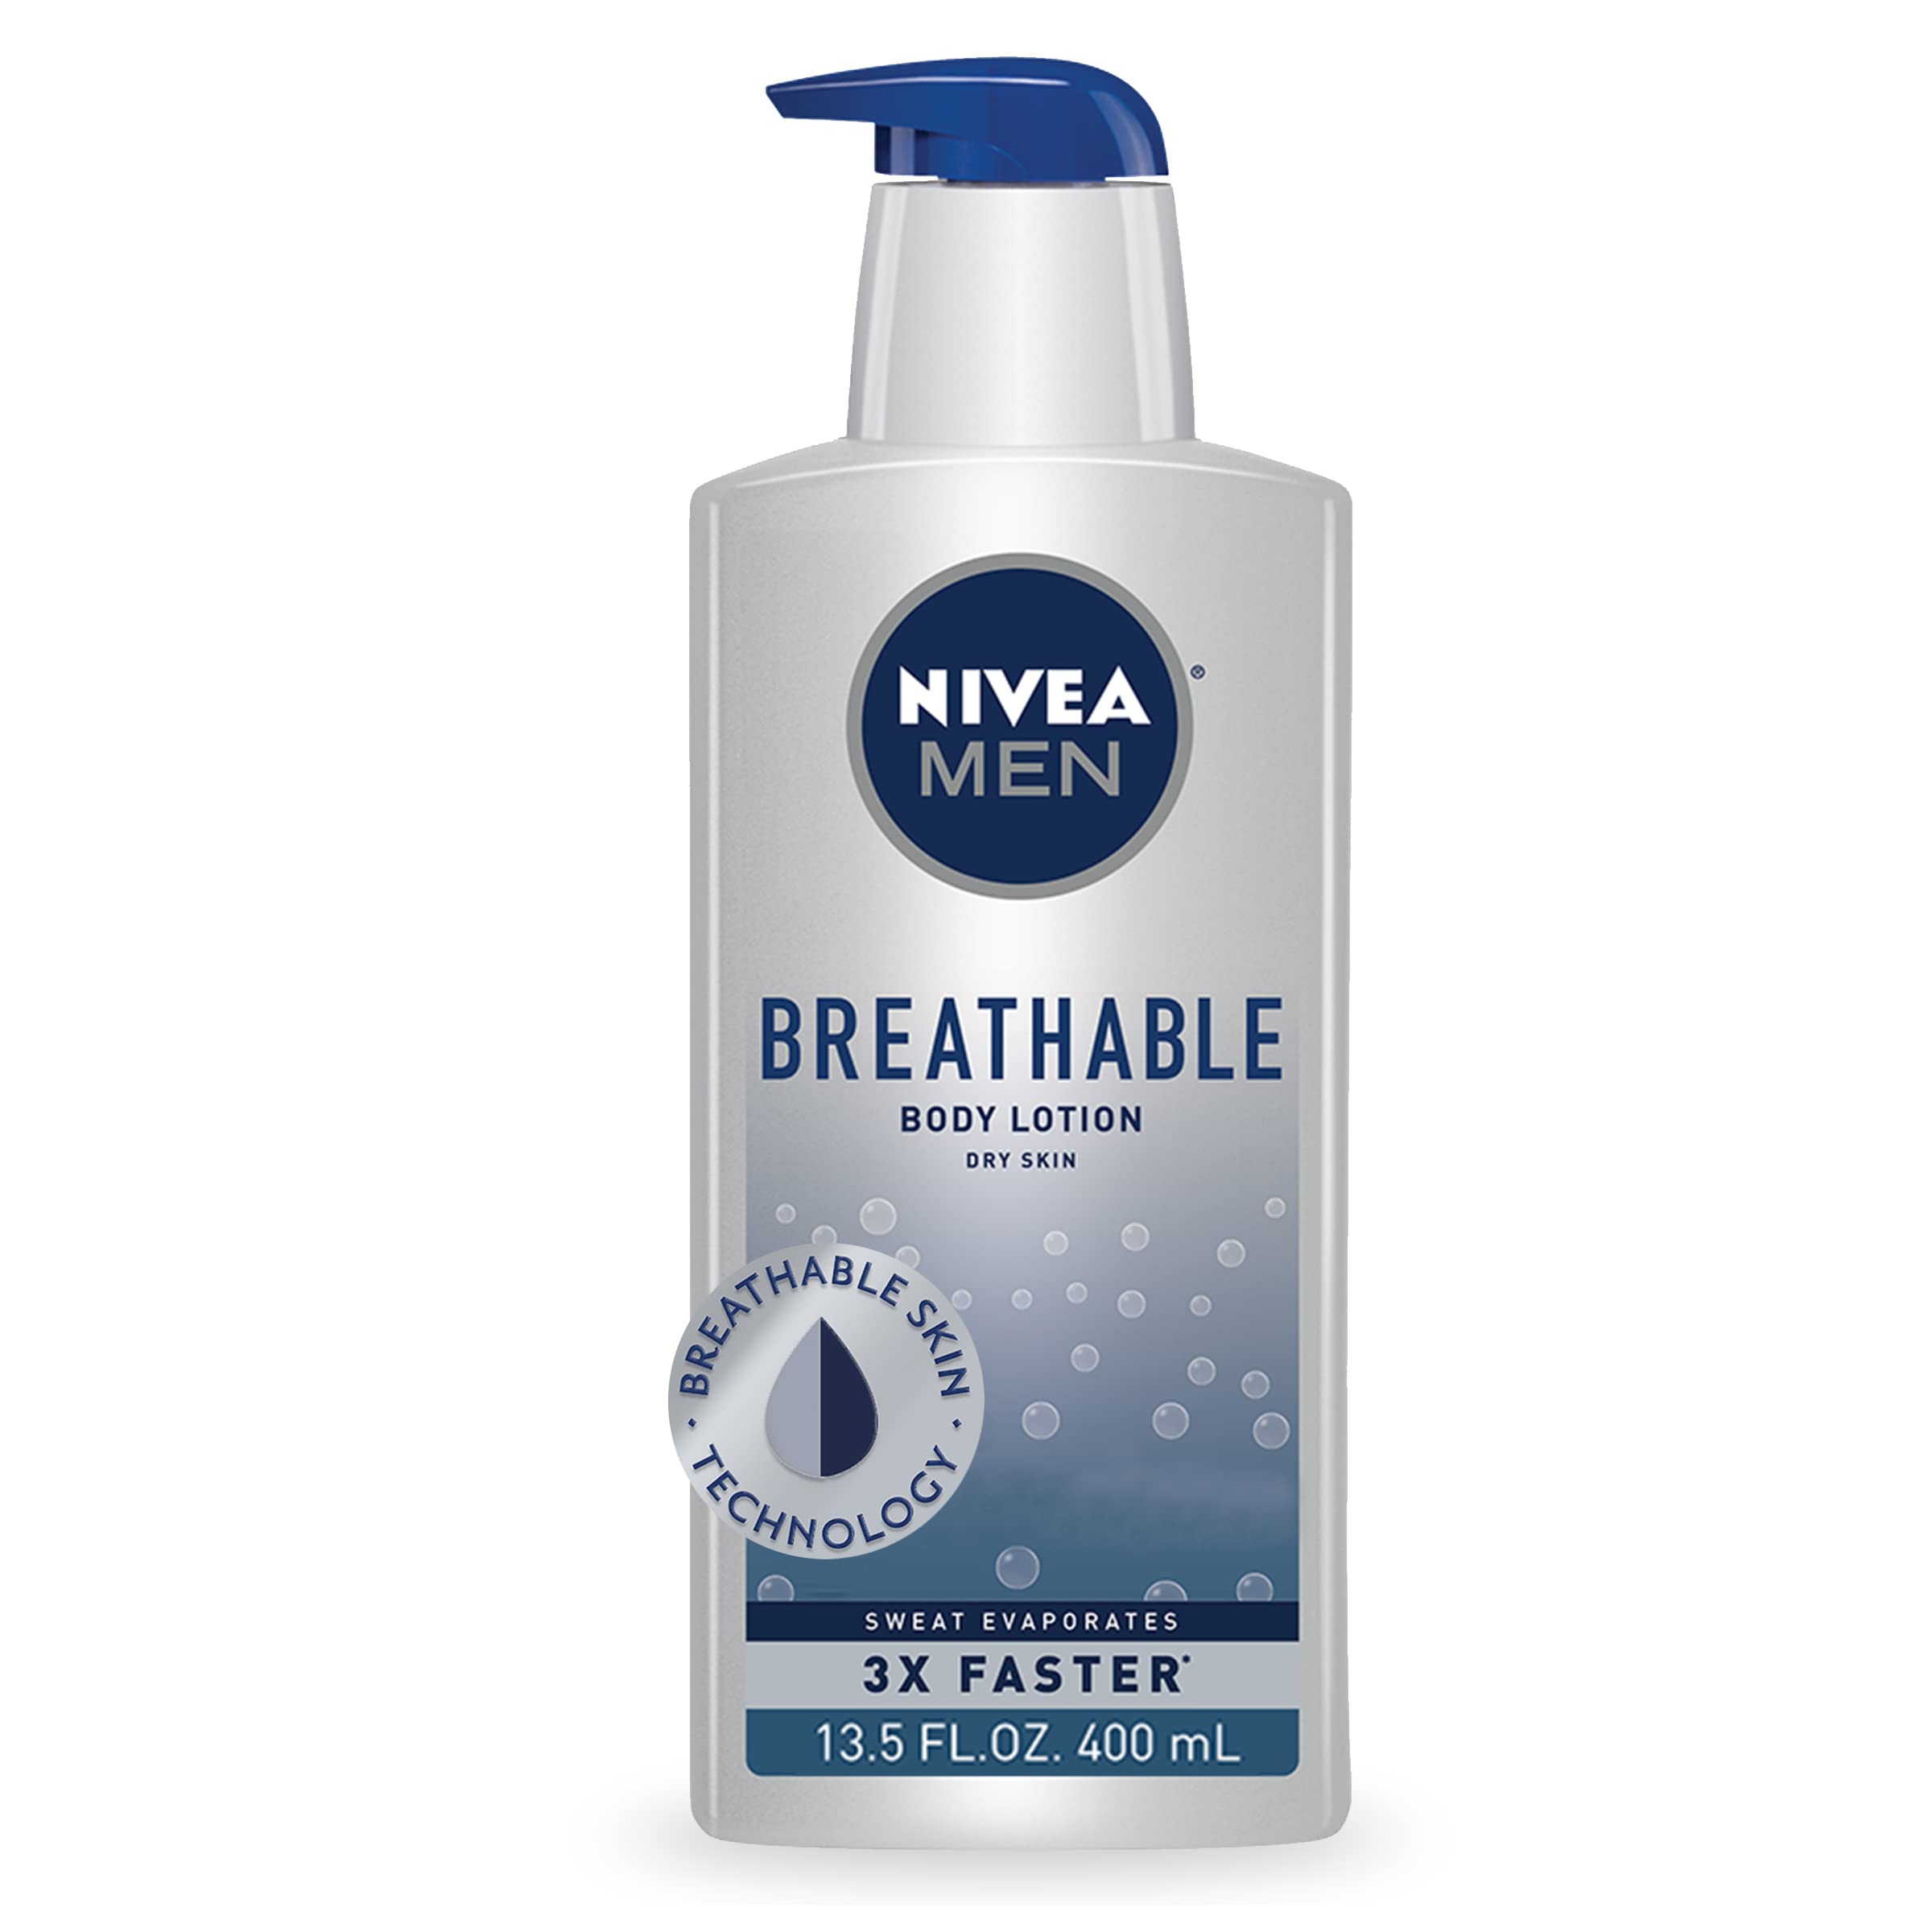 Nivea Men Breathable Body Lotion - Sweat Evaporates Faster, No Sticky Feel, Fresh Scent, Dry Skin, 13.5 Ounce